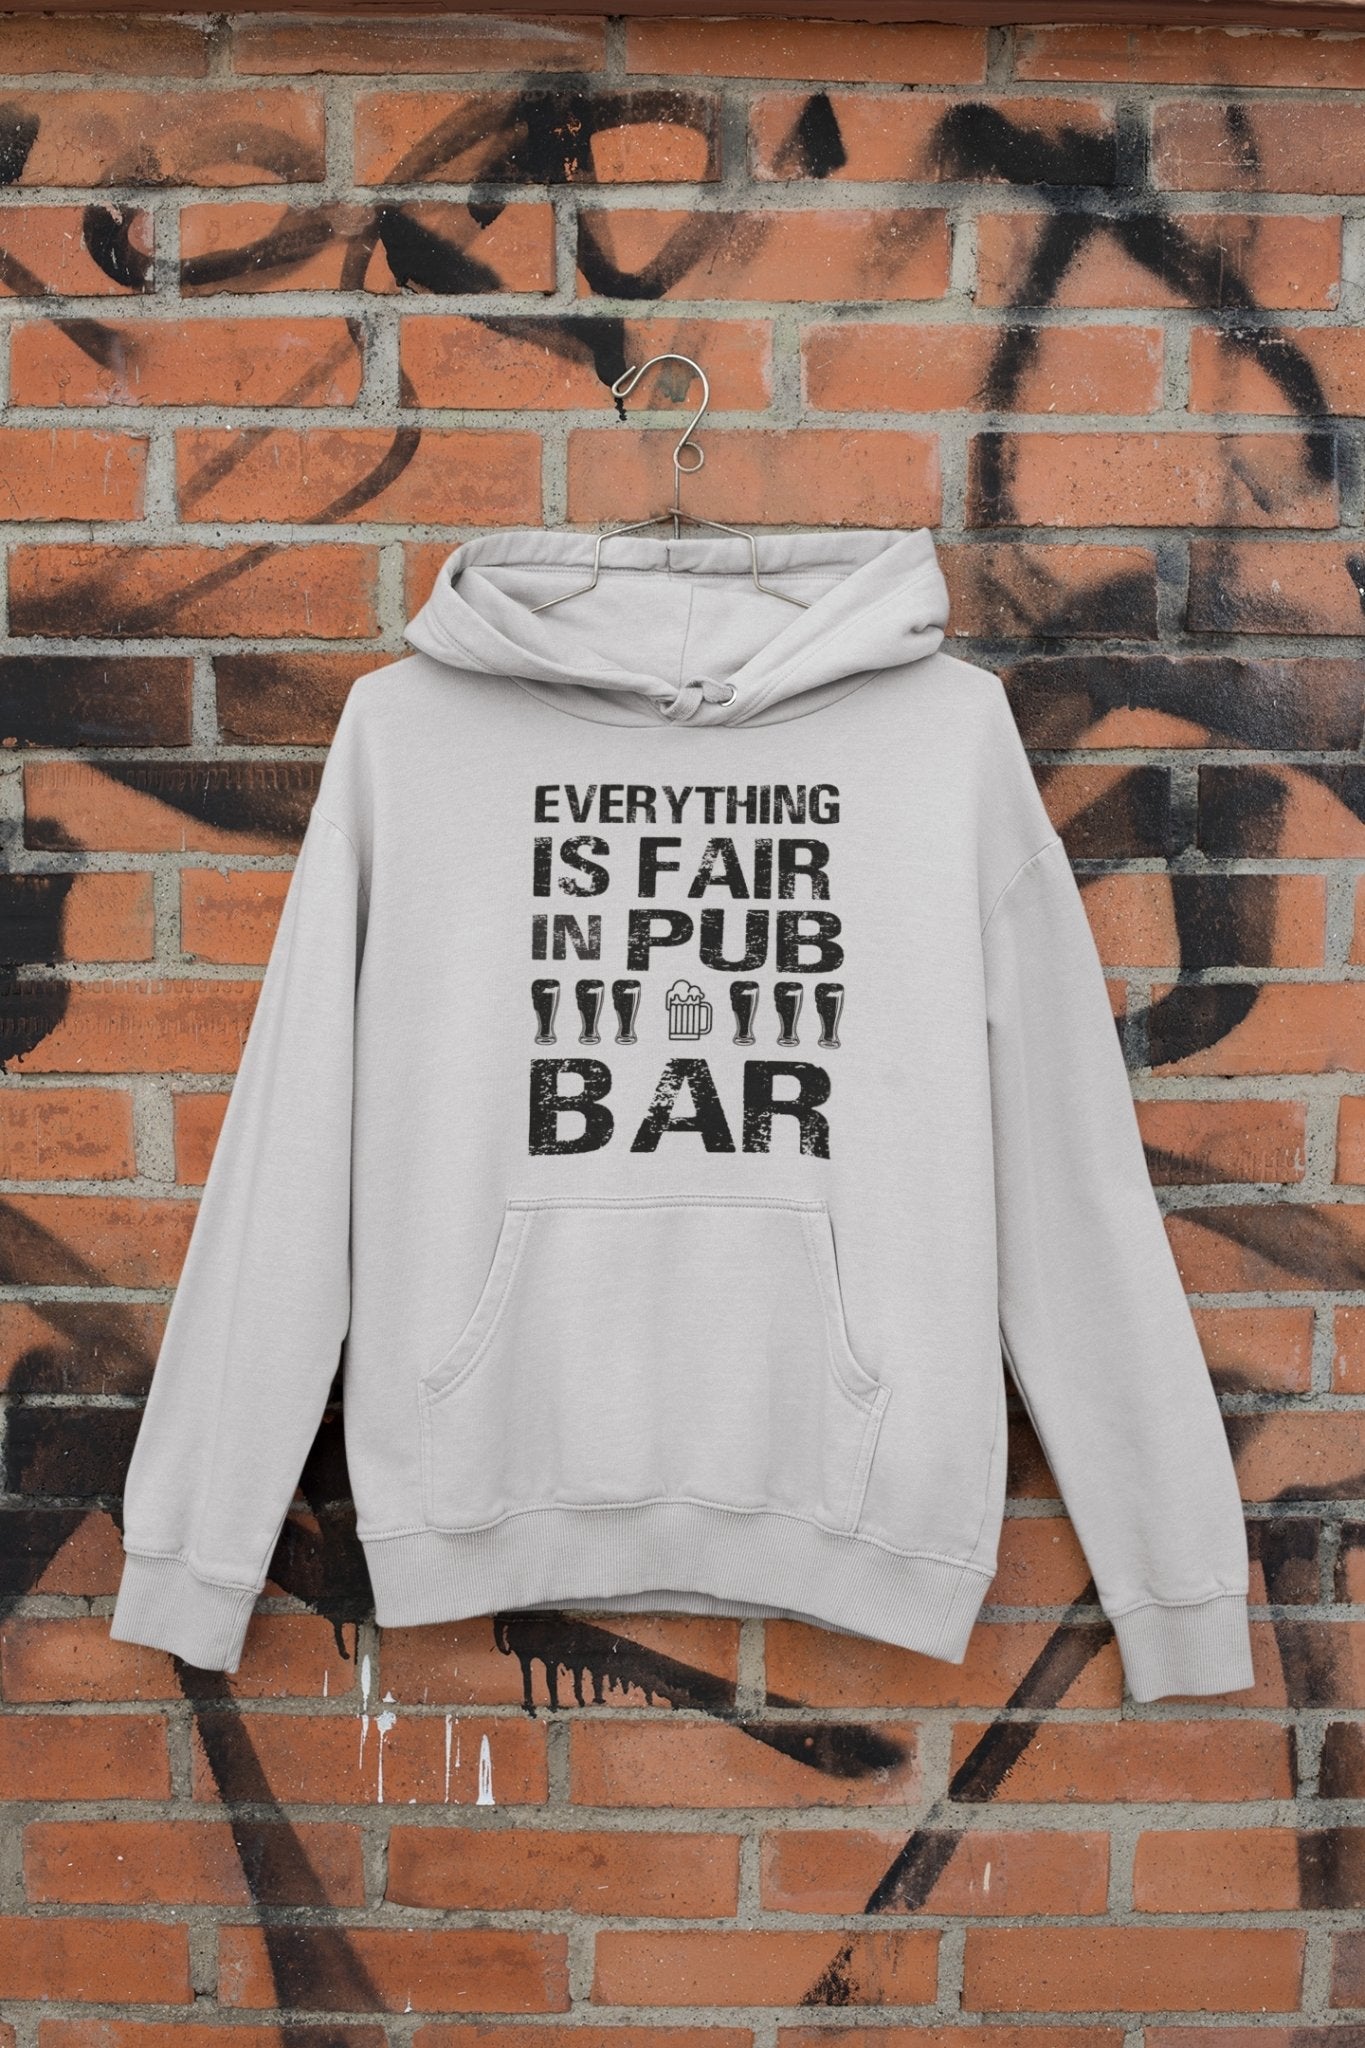 Everthing Is Fair In Pub And Bar Hoodies for Women-FunkyTradition - Funky Tees Club